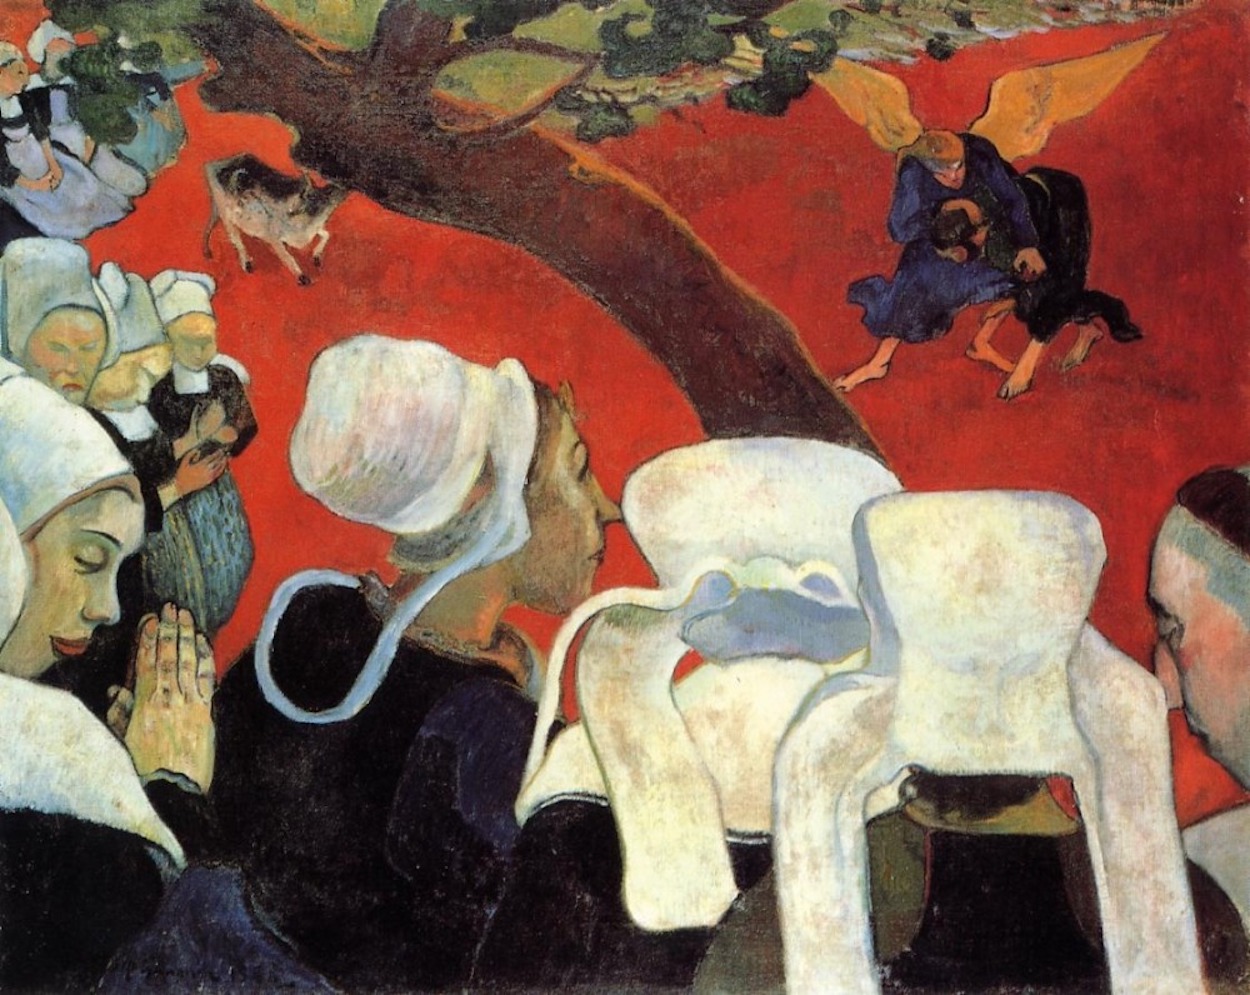 The Vision After the Sermon by Paul Gauguin - 1888 - 74.4 x 93.1 cm National Galleries of Scotland